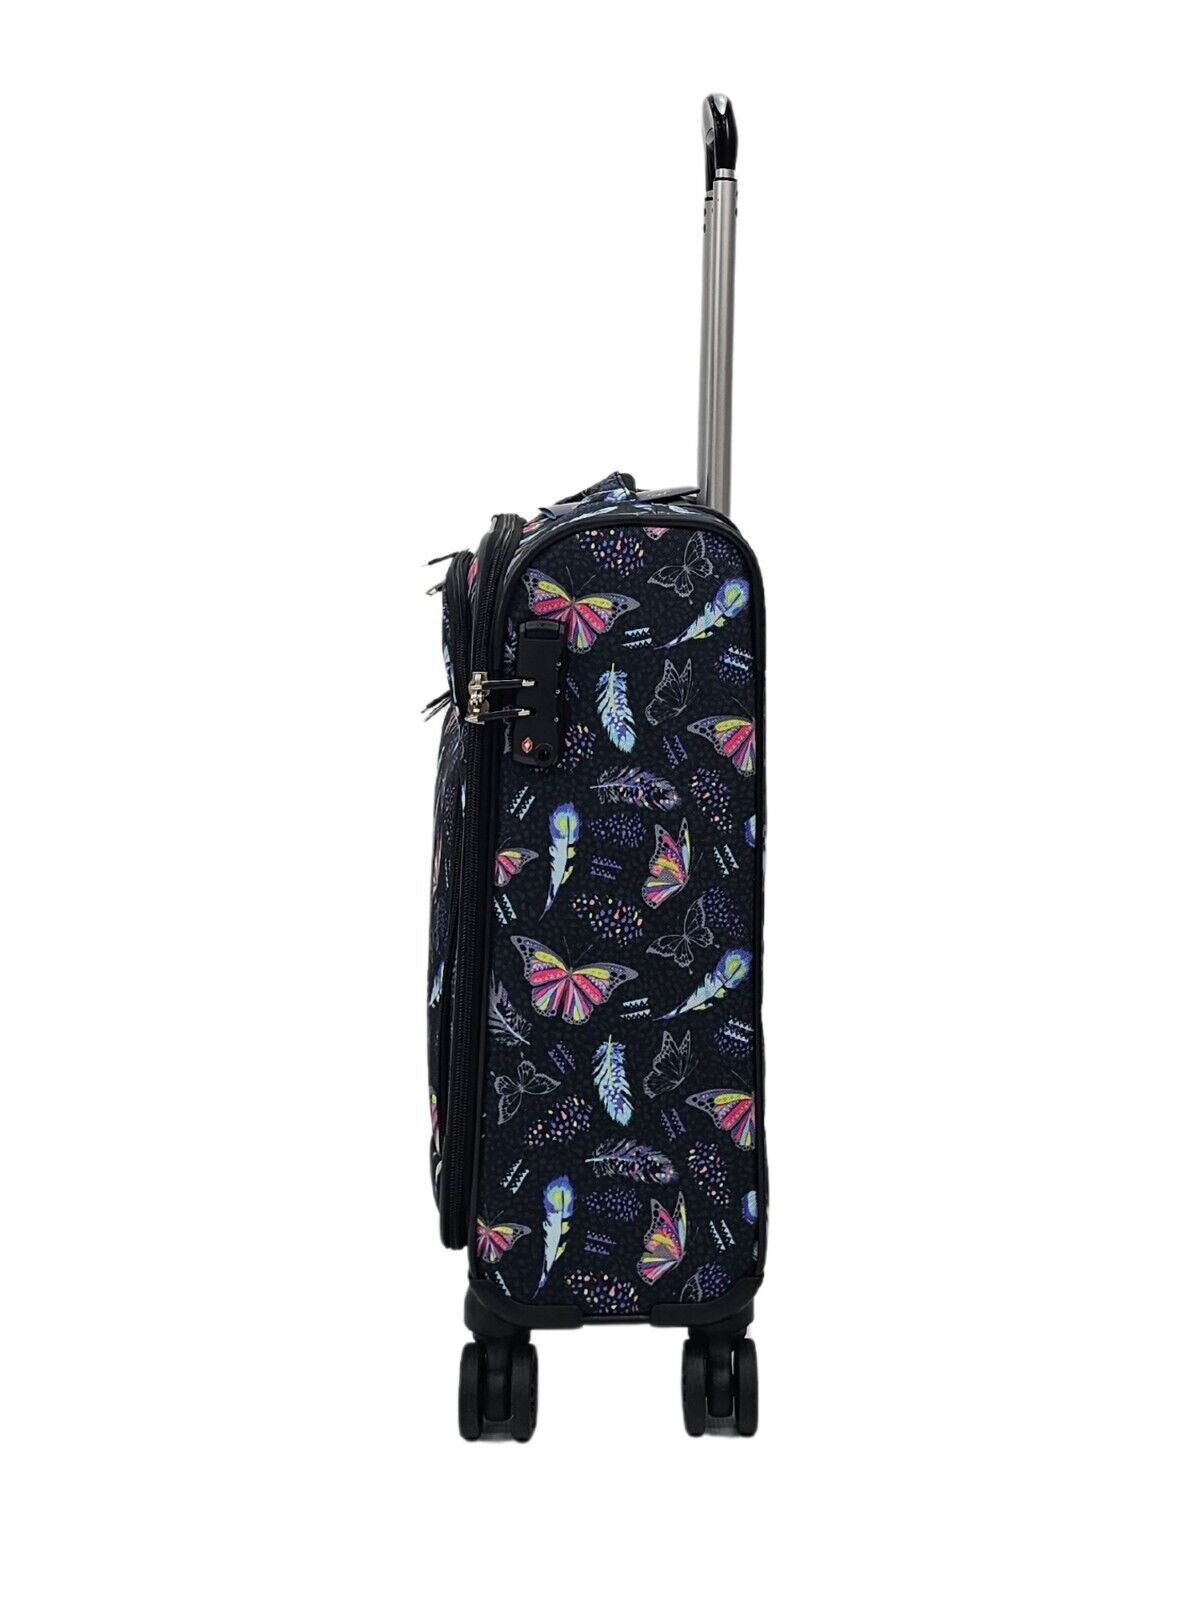 Lightweight Suitcases 8 Wheel Luggage Butterfly Travel Soft Bags